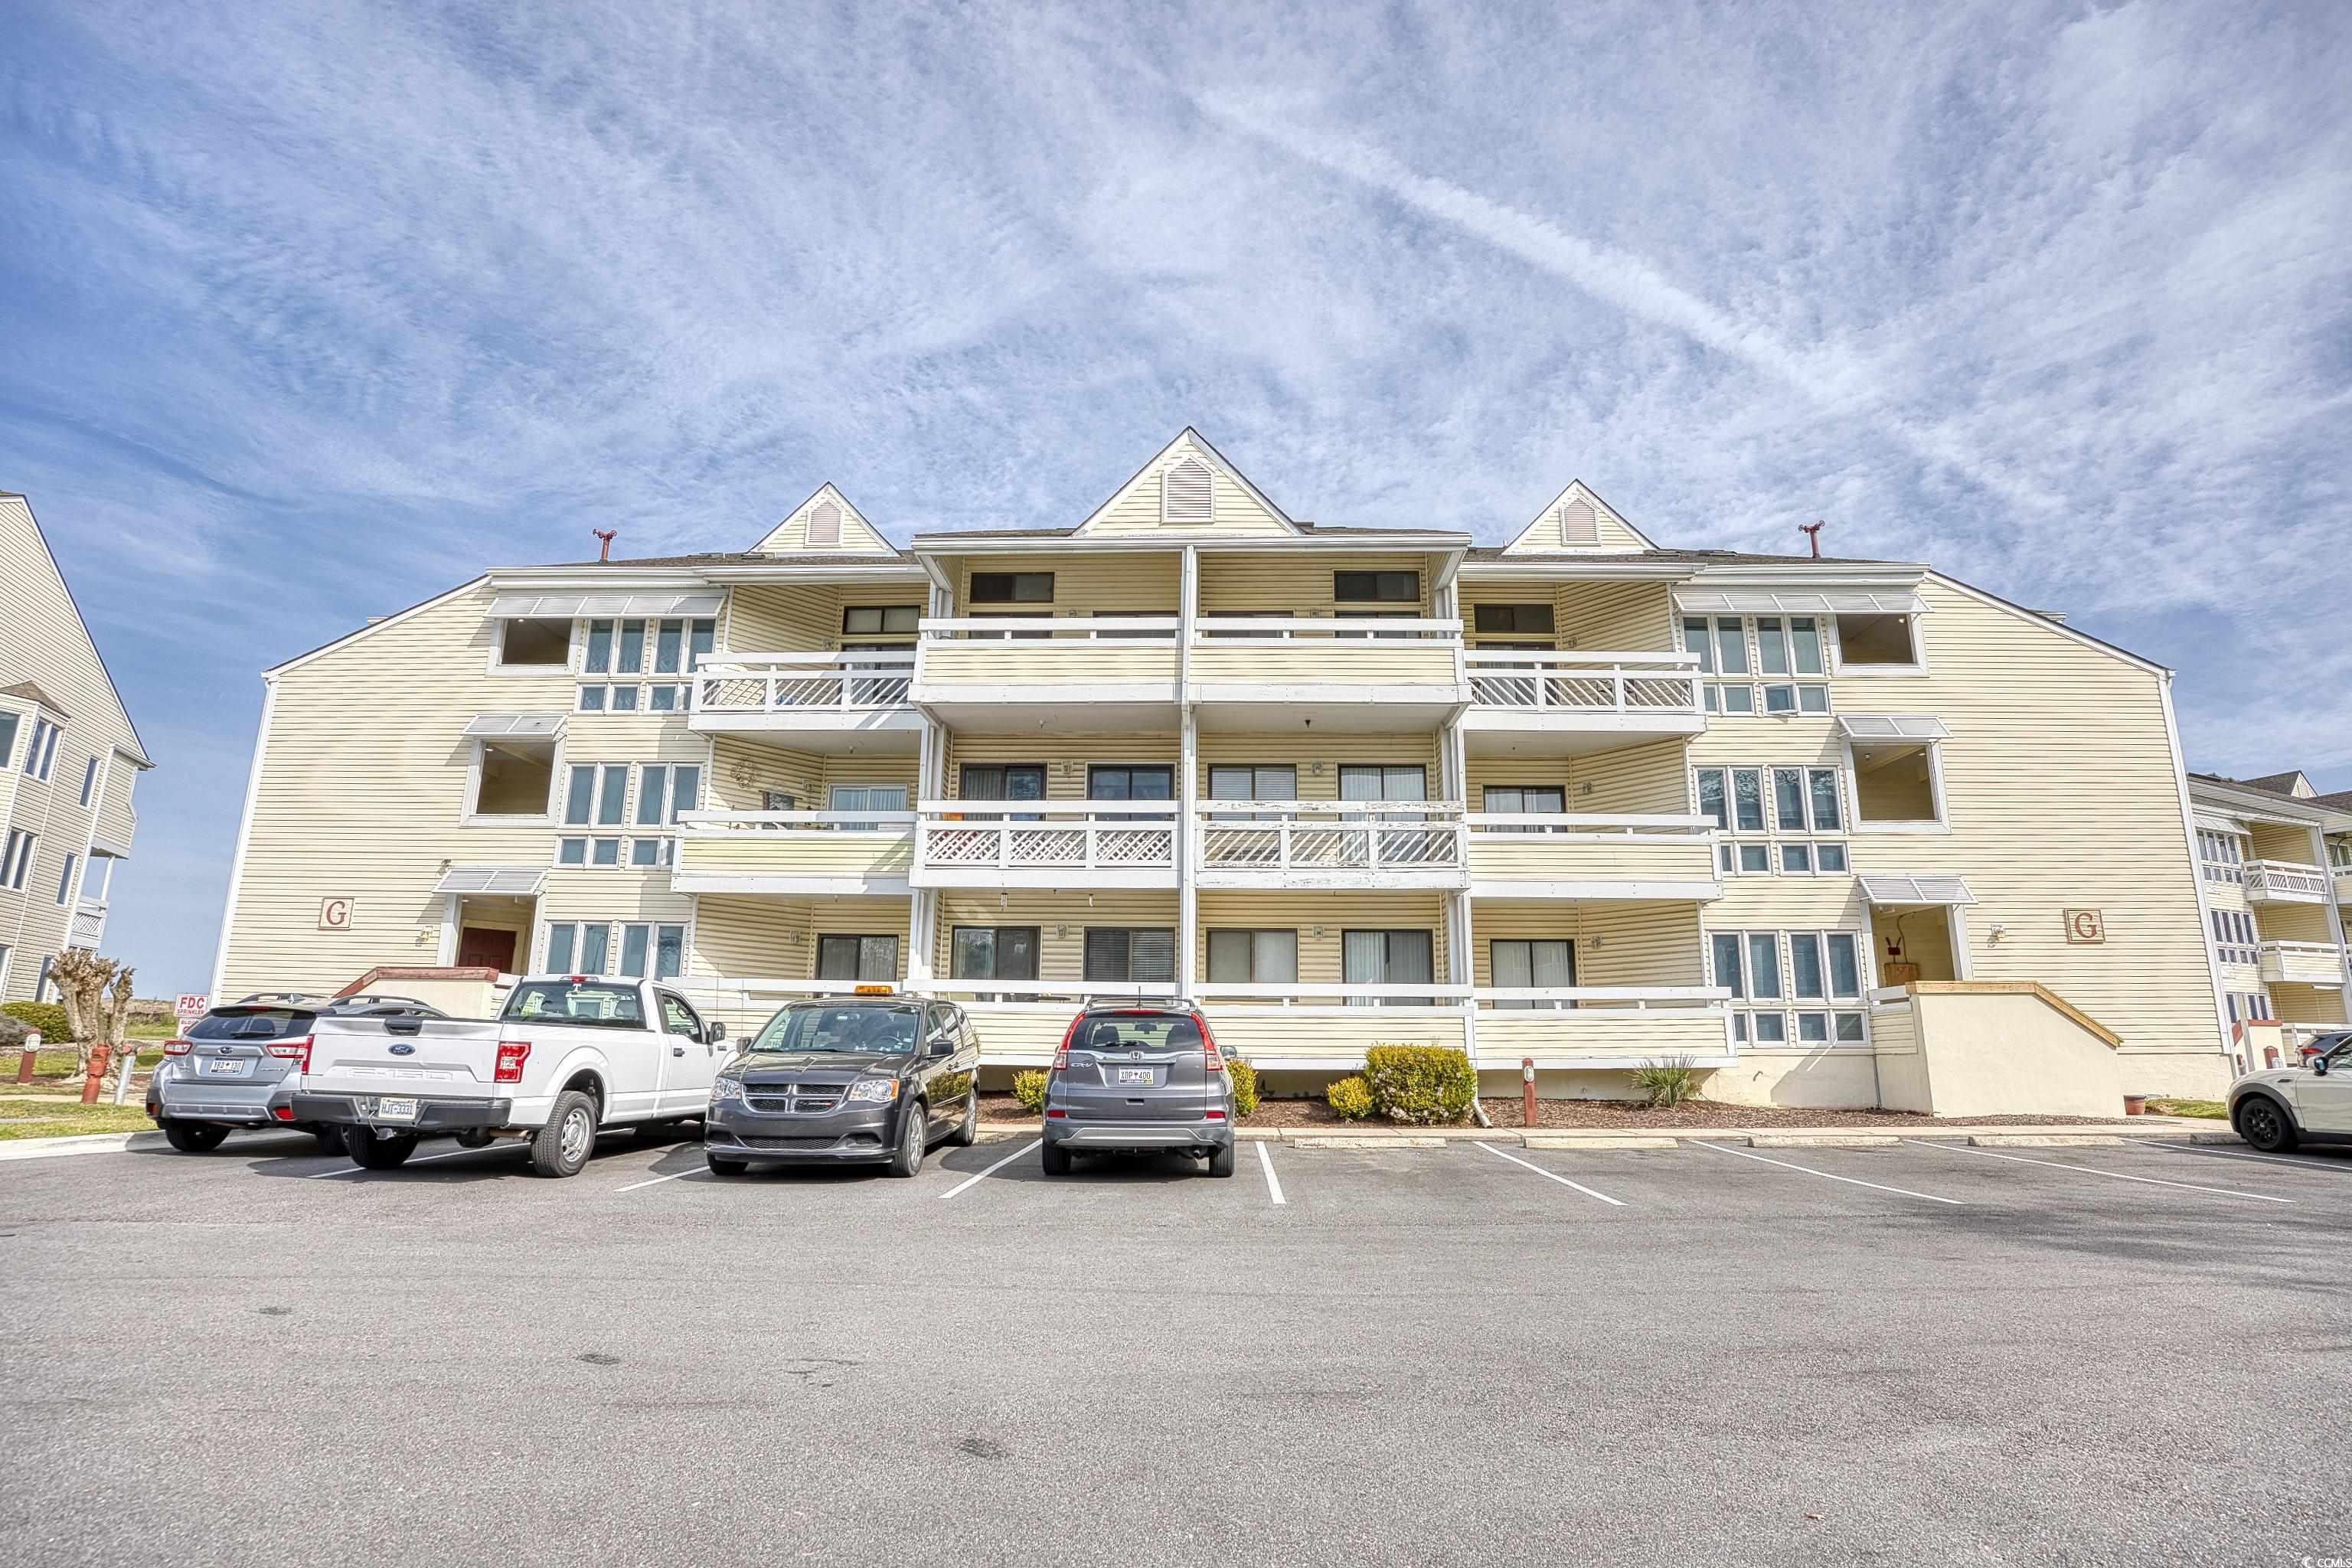 what better way is there to enjoy your own piece of paradise in north myrtle beach, than to have your own home away from home.  only better, because this is less than a mile to the beautiful atlantic ocean and away from the busy summer tourist area.  this is a top floor, 1br/1ba unit that can accommodate 6 people.  the kitchen includes a cooktop, new refrigerator, and wall length buffet.  a european dishwasher (no plumbing needed), oster convection countertop oven, and a dryer in the unit, are a few of the items included for your convenience.   upgrades made to the unit include lvp flooring in the entry and main living area, wainscot paneling in bathroom and main living area, decorative moldings throughout and new carpeting in the loft bedroom.  some features you won't see in the other 1/br units are a decorative electric fireplace in the living room, a custom hardwood, closed staircase with open rungs, and a supplemental heat/air unit in the loft bedroom. the nmb golf & tennis units have outdoor grilling stations, a community pool, tennis courts, and allow golf carts.  this complex is adjacent to the nmb j bryan floyd community center, which offers many year-round activities to residents and guests alike.  north myrtle beach offers carefree and fun in the sun beaches, plenty of entertainment venues, world class golf courses, charming boutiques and shopping centers, a splendid array of dining options, and top-notch medical facilities. this condo is in the perfect location to savor coastal living in nmb whether as a primary home, a vacation home, or an investment property. don’t wait too long or you will miss out on the opportunity to enjoy this affordable coastal lifestyle.